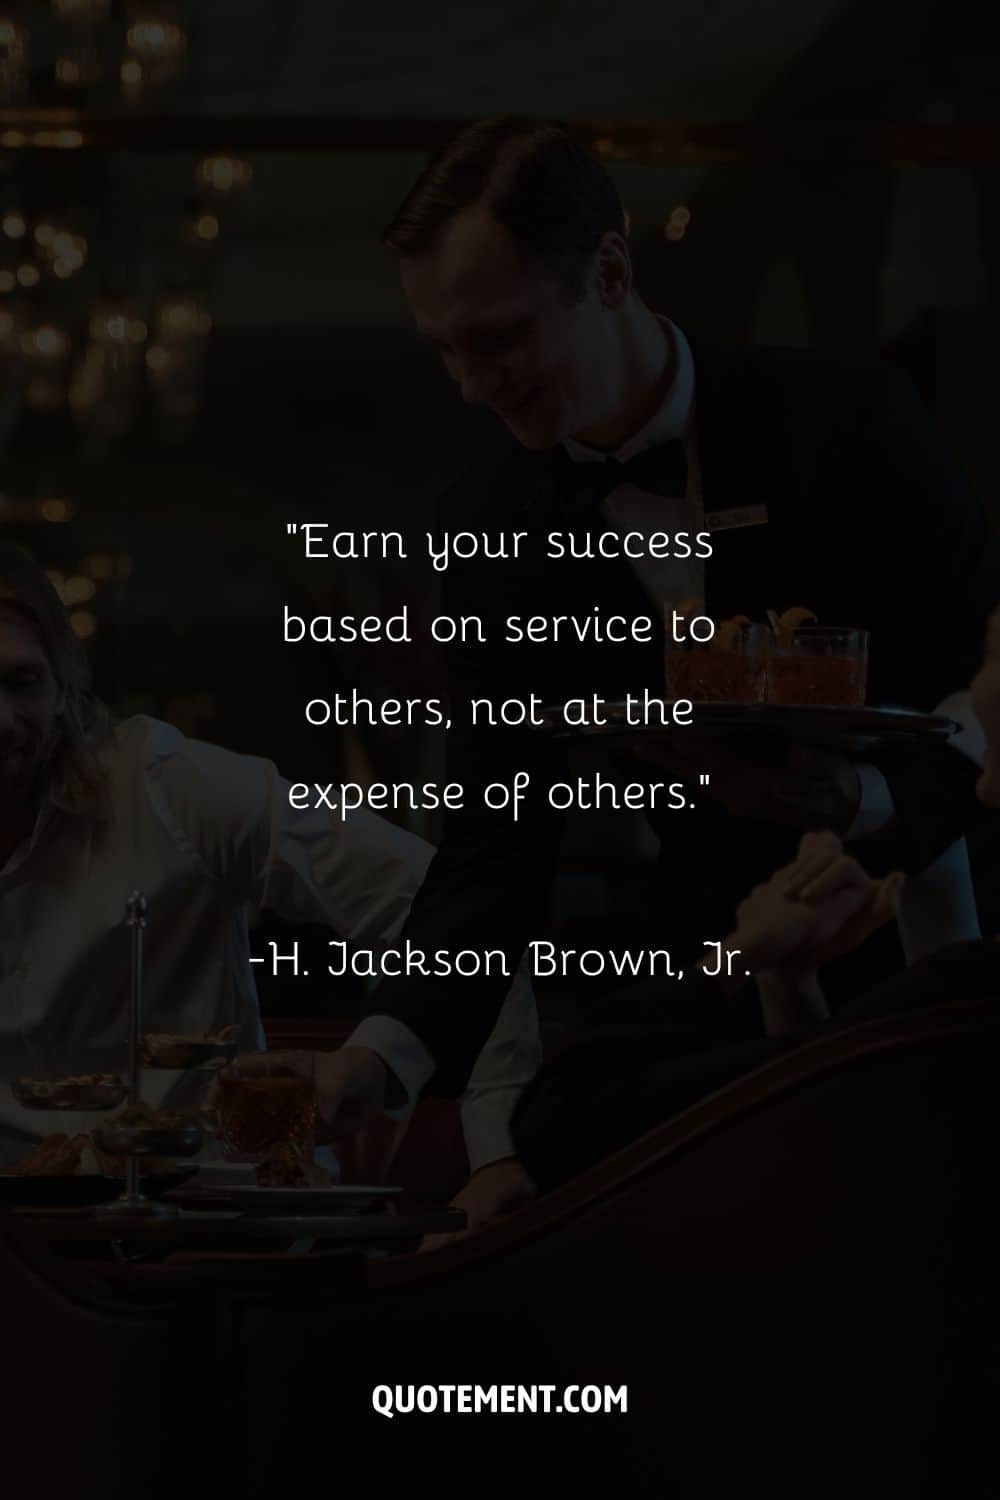 Image of a waiter serving beverages representing a quote on serving people